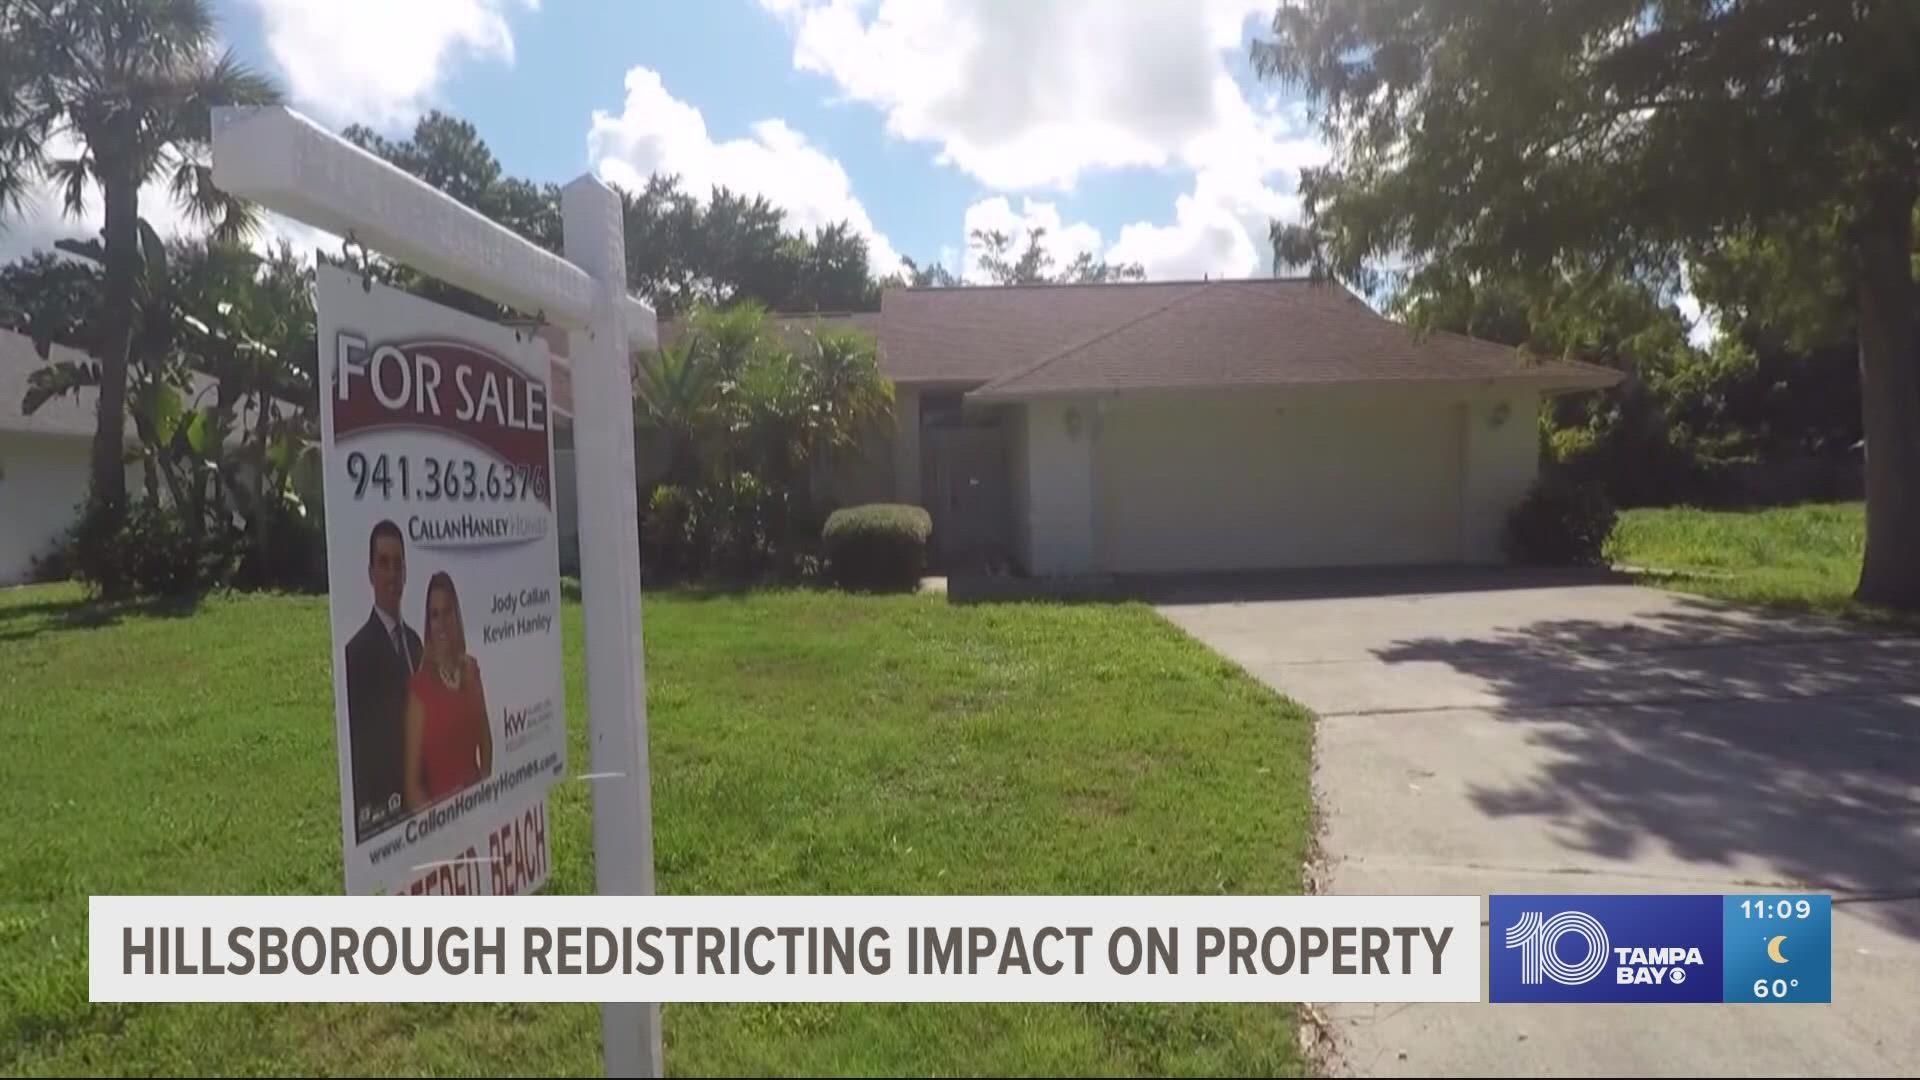 Tampa real estate agent Kristina Kuba suspects the local housing market will see a "freeze" until the school redistricting decision is finalized.